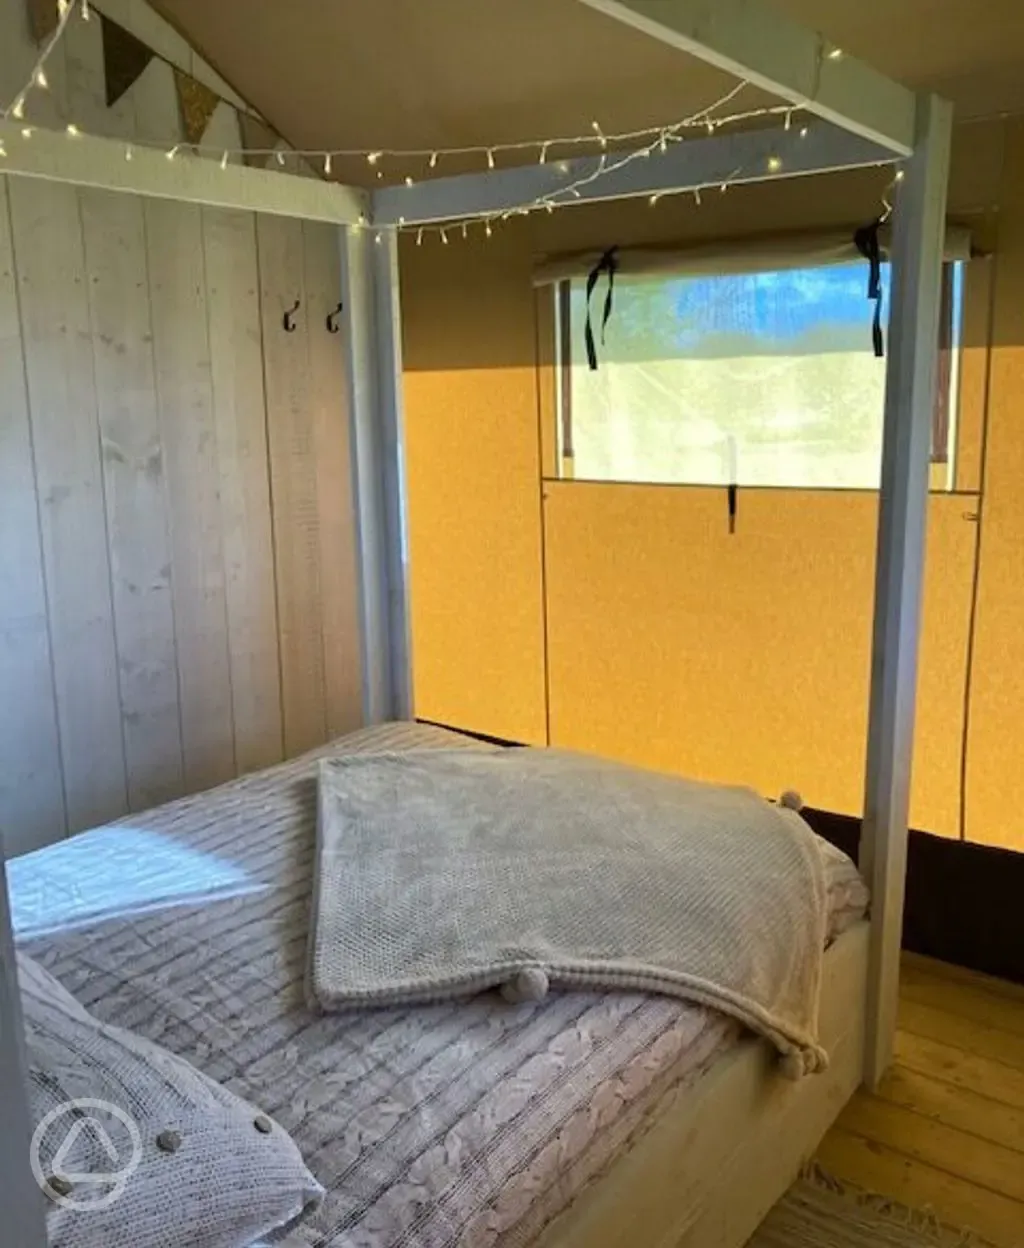 Four poster beds in safari tents